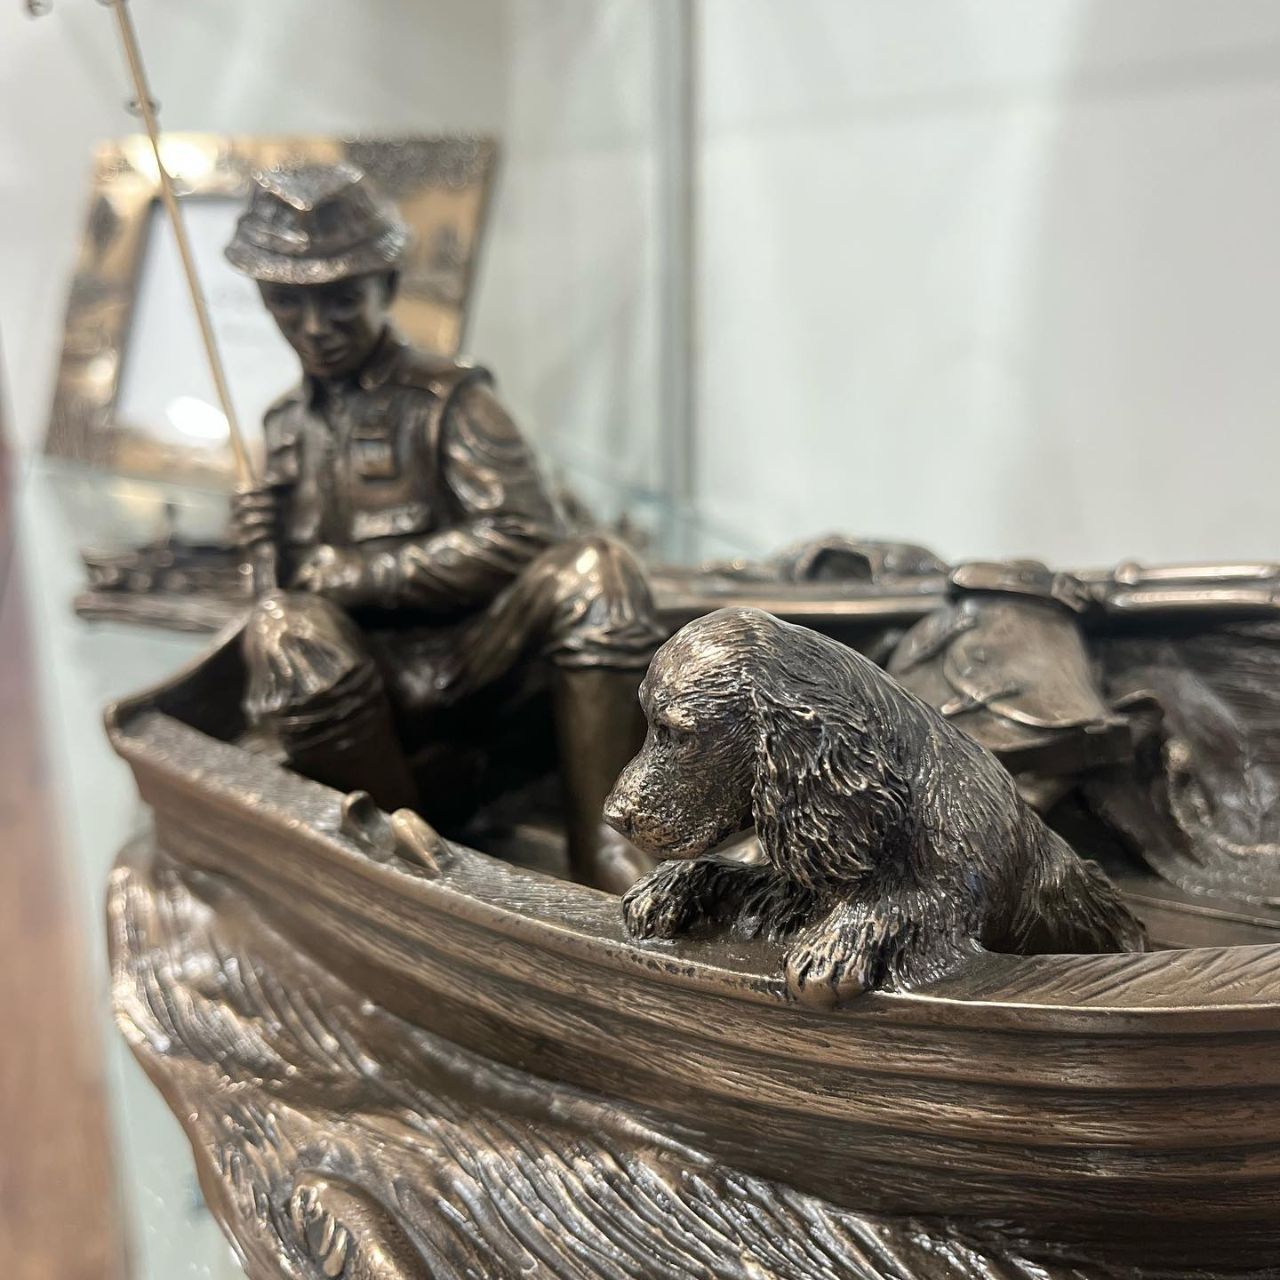 A Day's Fishing by Genesis  This stunning piece of a man fishing from a boat made by Genesis could be a great gift for a fishing enthusiast or as a presentation piece.